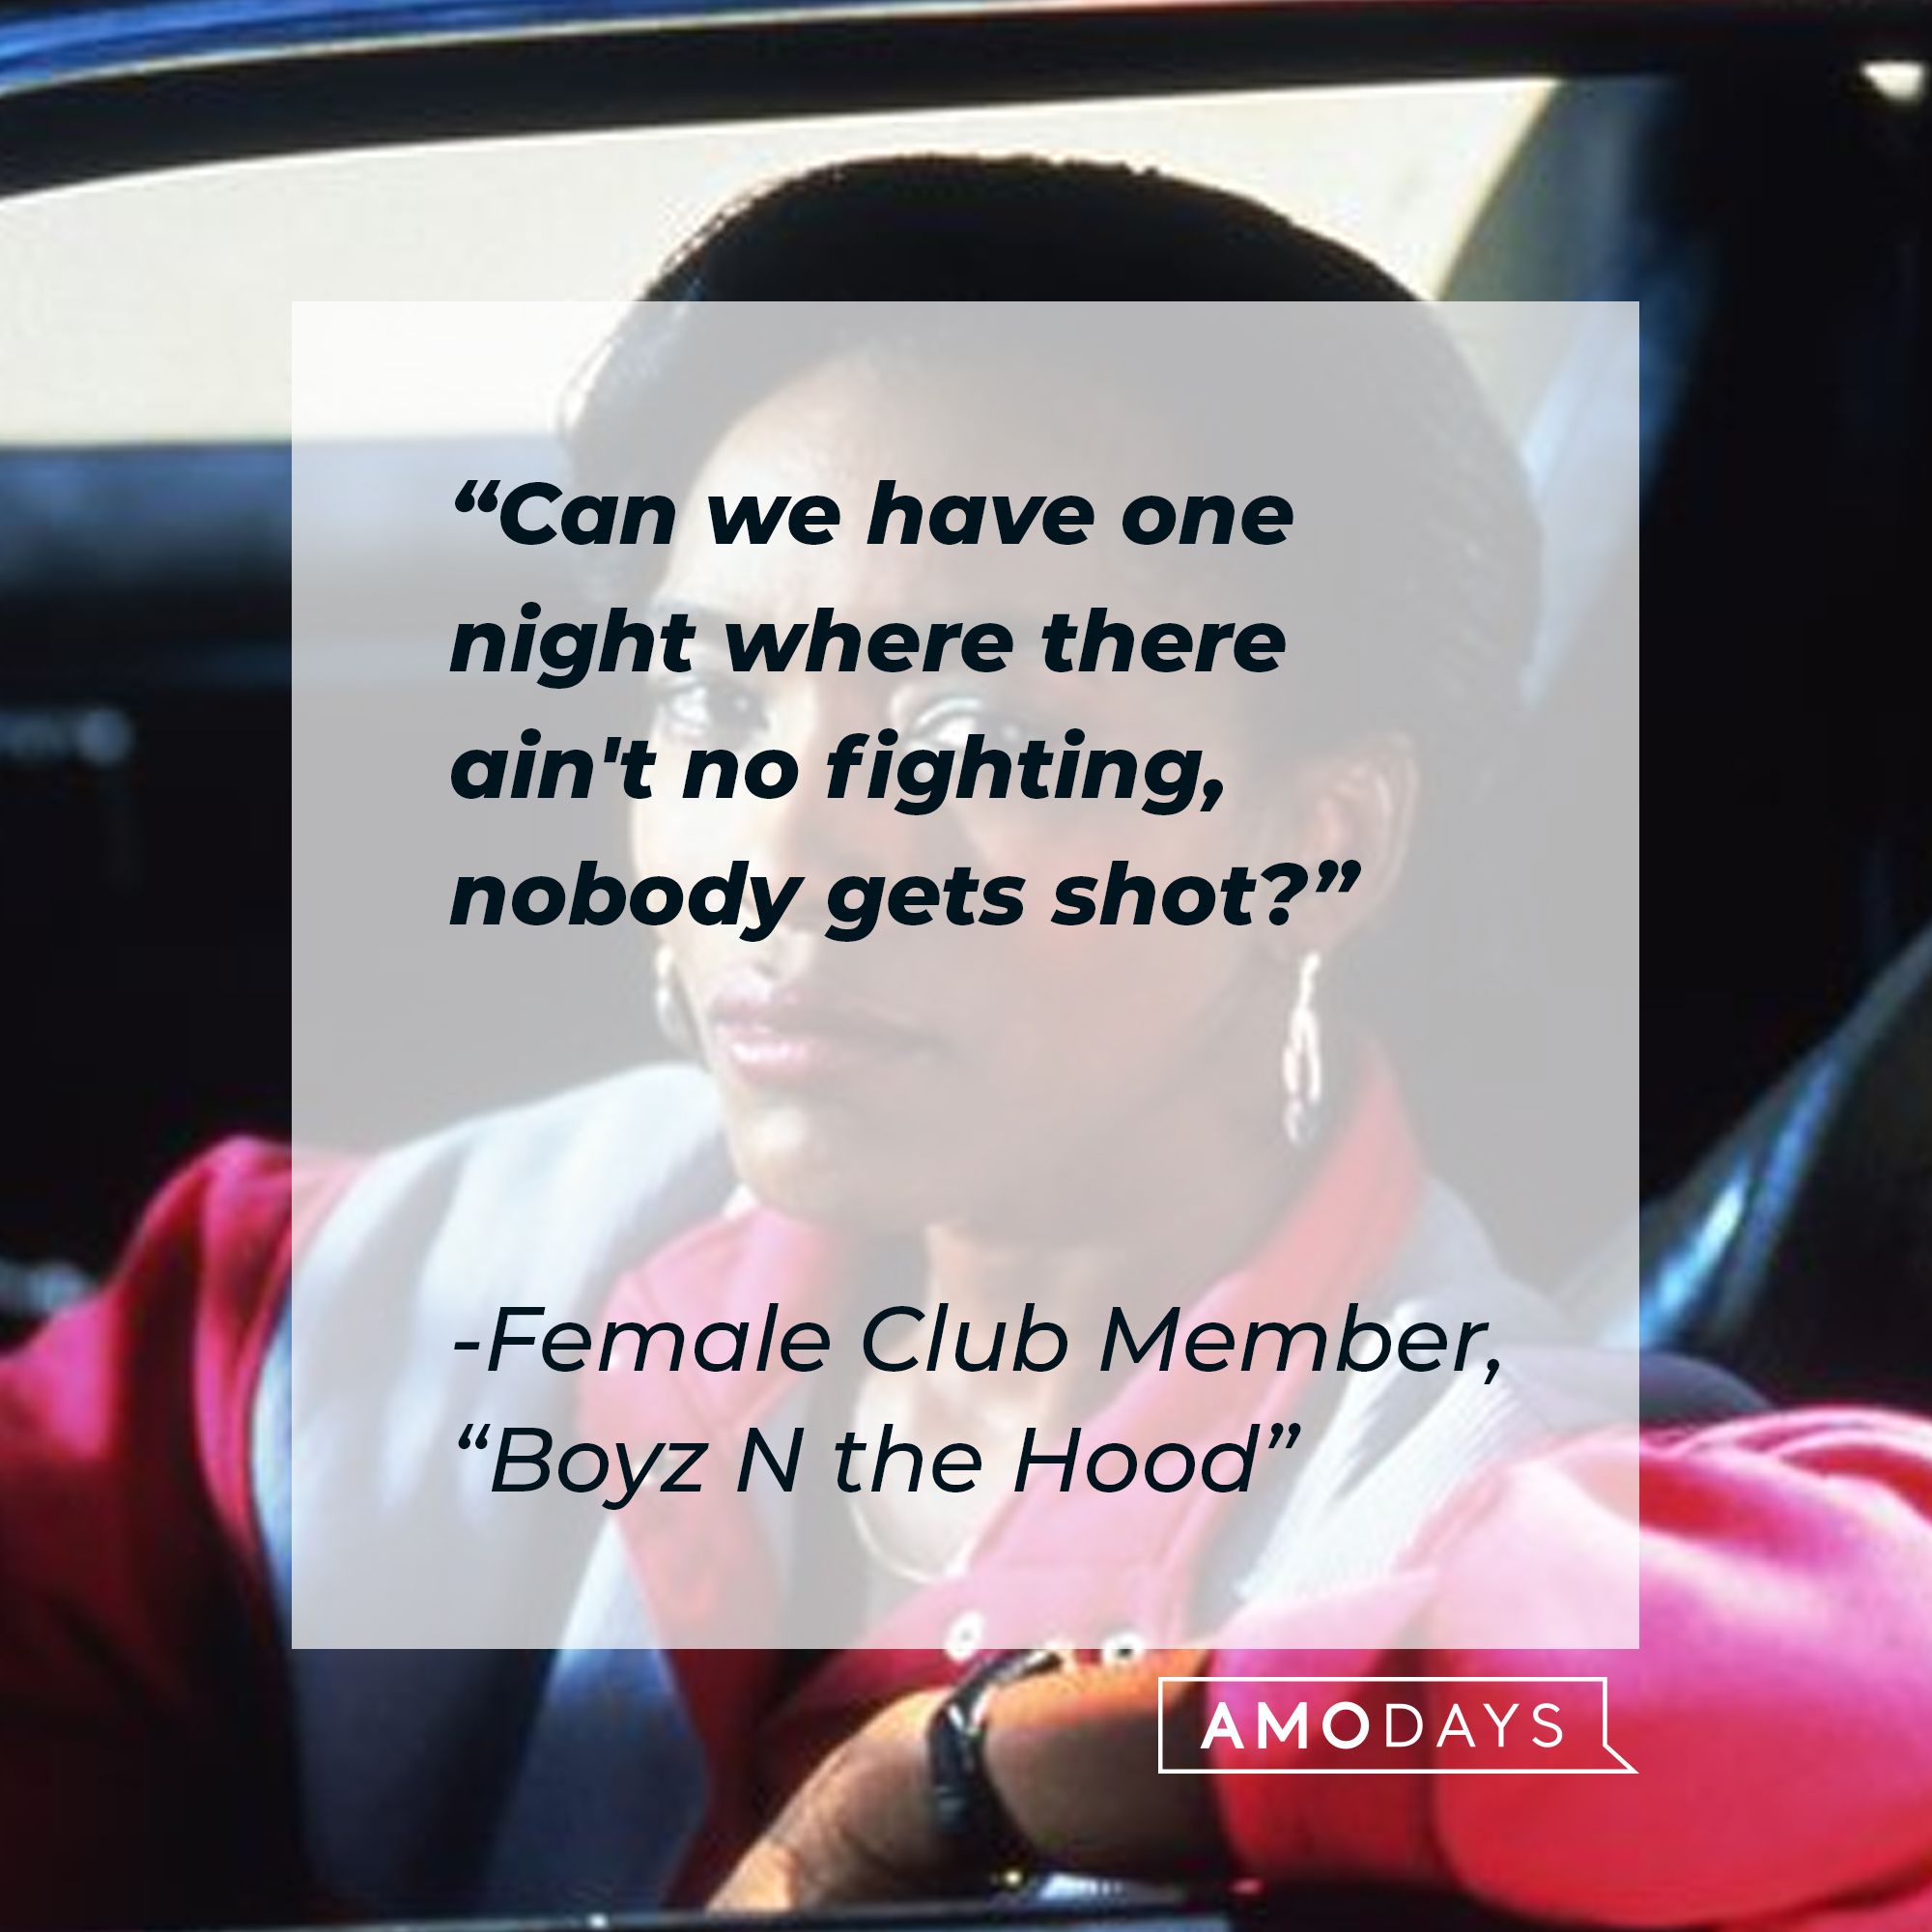 Female Club Member's quote in "Boyz N the Hood:" "Can we have one night where there ain't no fighting, nobody gets shot?" | Source: Facebook.com/BoyzNtheHood